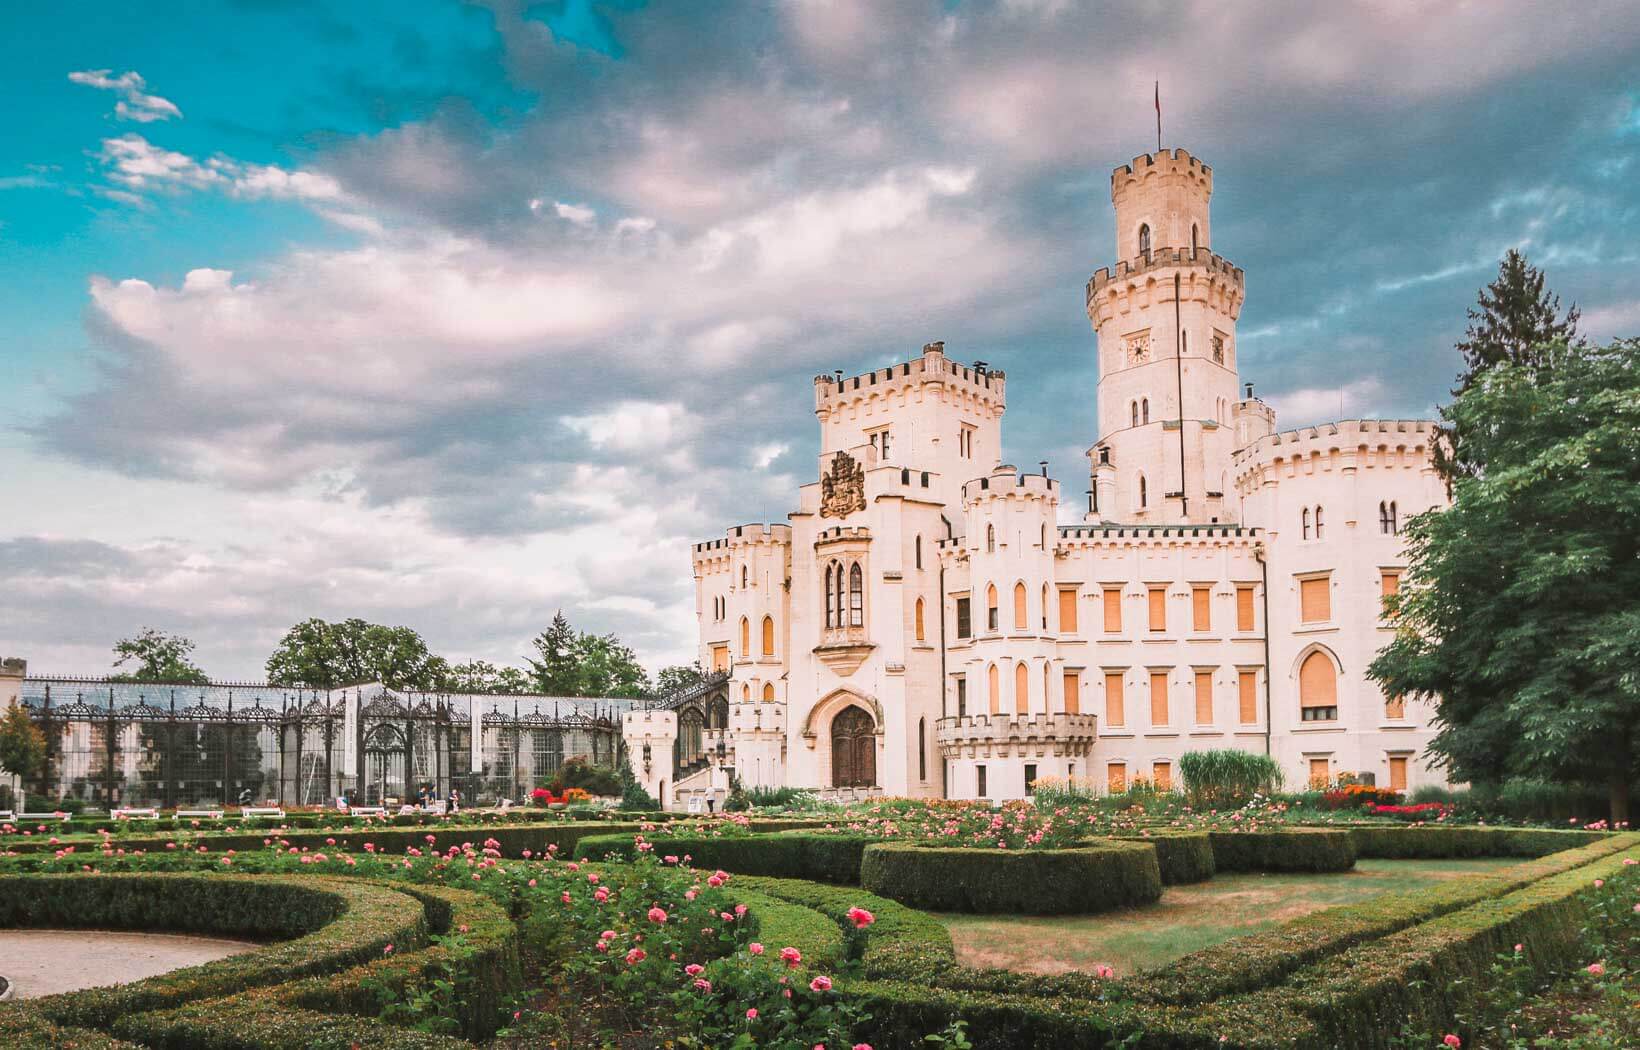 Hluboka Castle. Fairy-Tale Castles in Czech Republic That You Didn't Know About